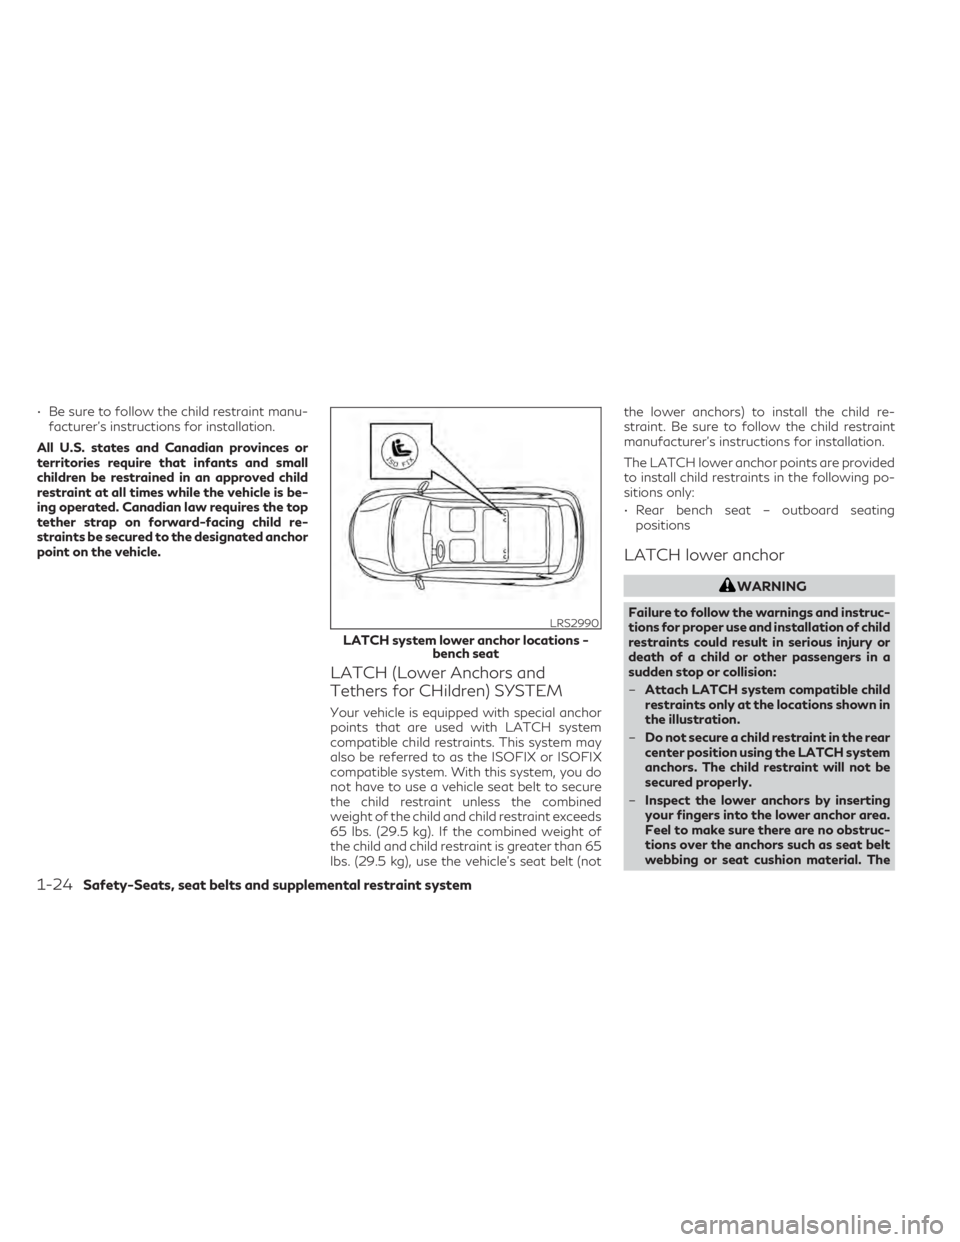 INFINITI QX50 2021  Owners Manual • Be sure to follow the child restraint manu-facturer's instructions for installation.
All U.S. states and Canadian provinces or
territories require that infants and small
children be restrained